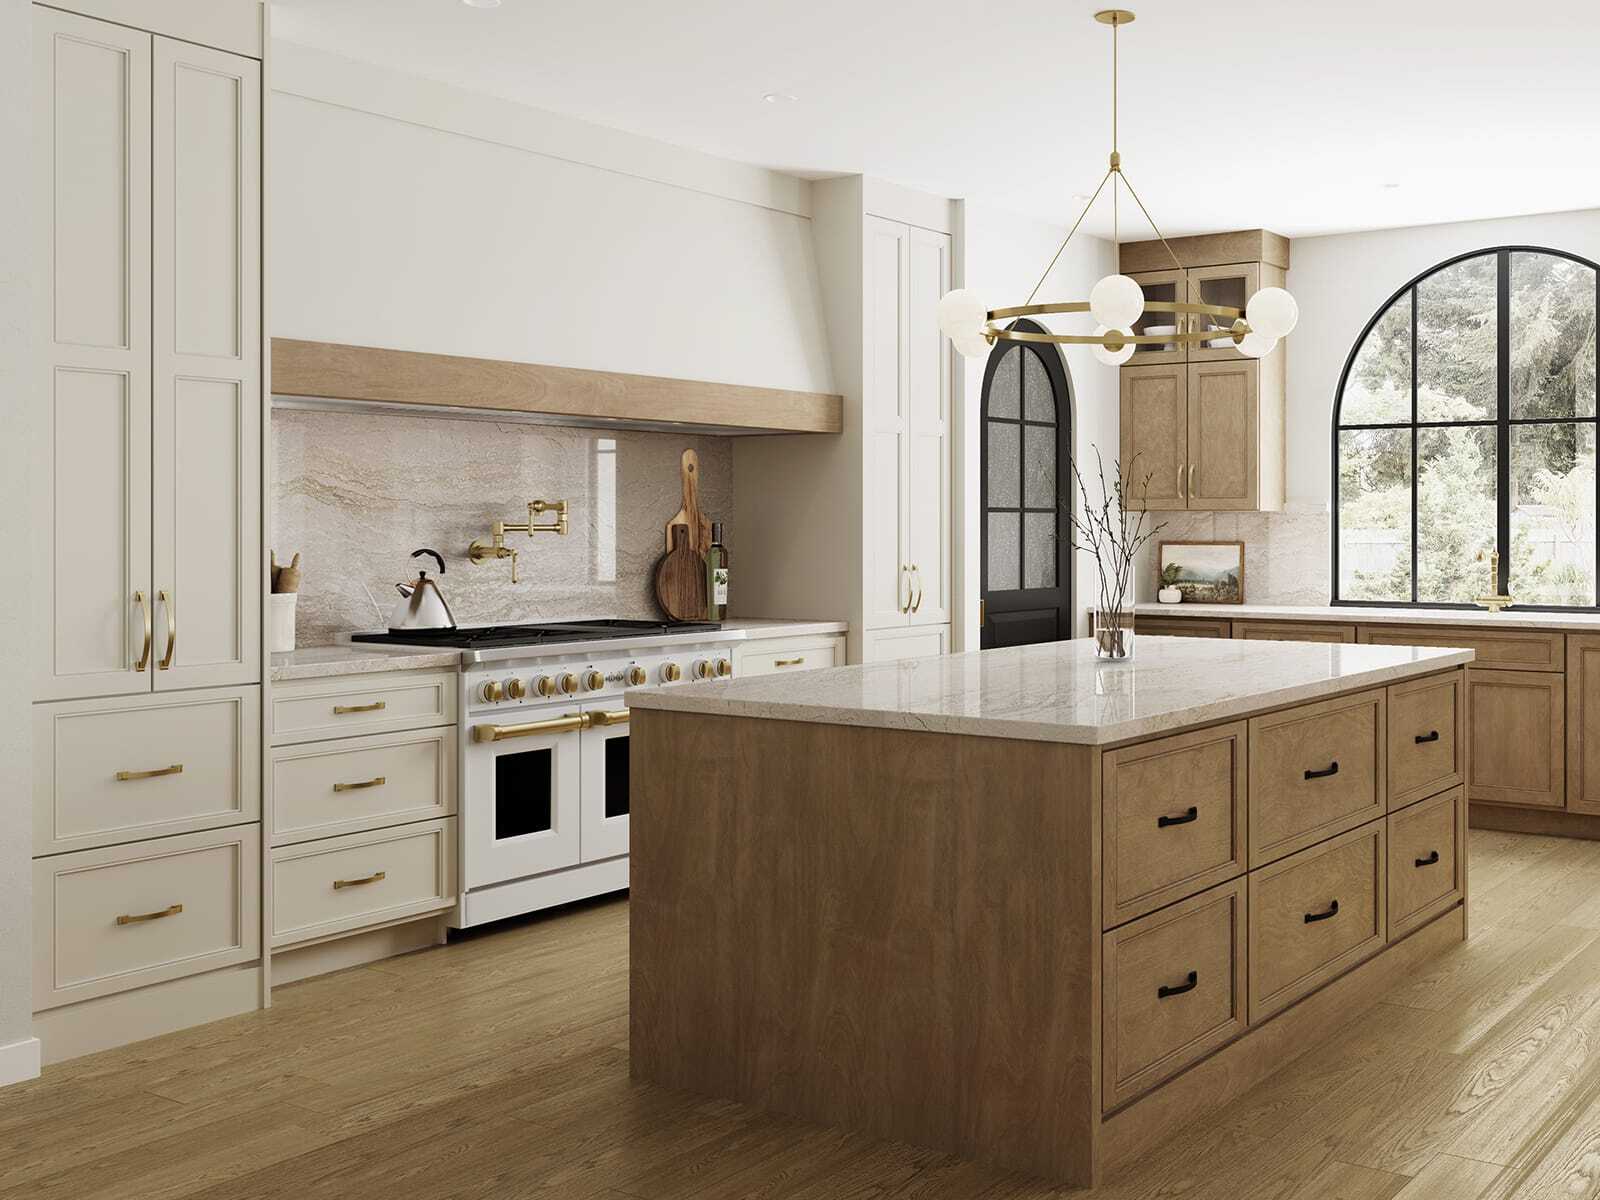 Warm Up Your Kitchen with New Neutrals